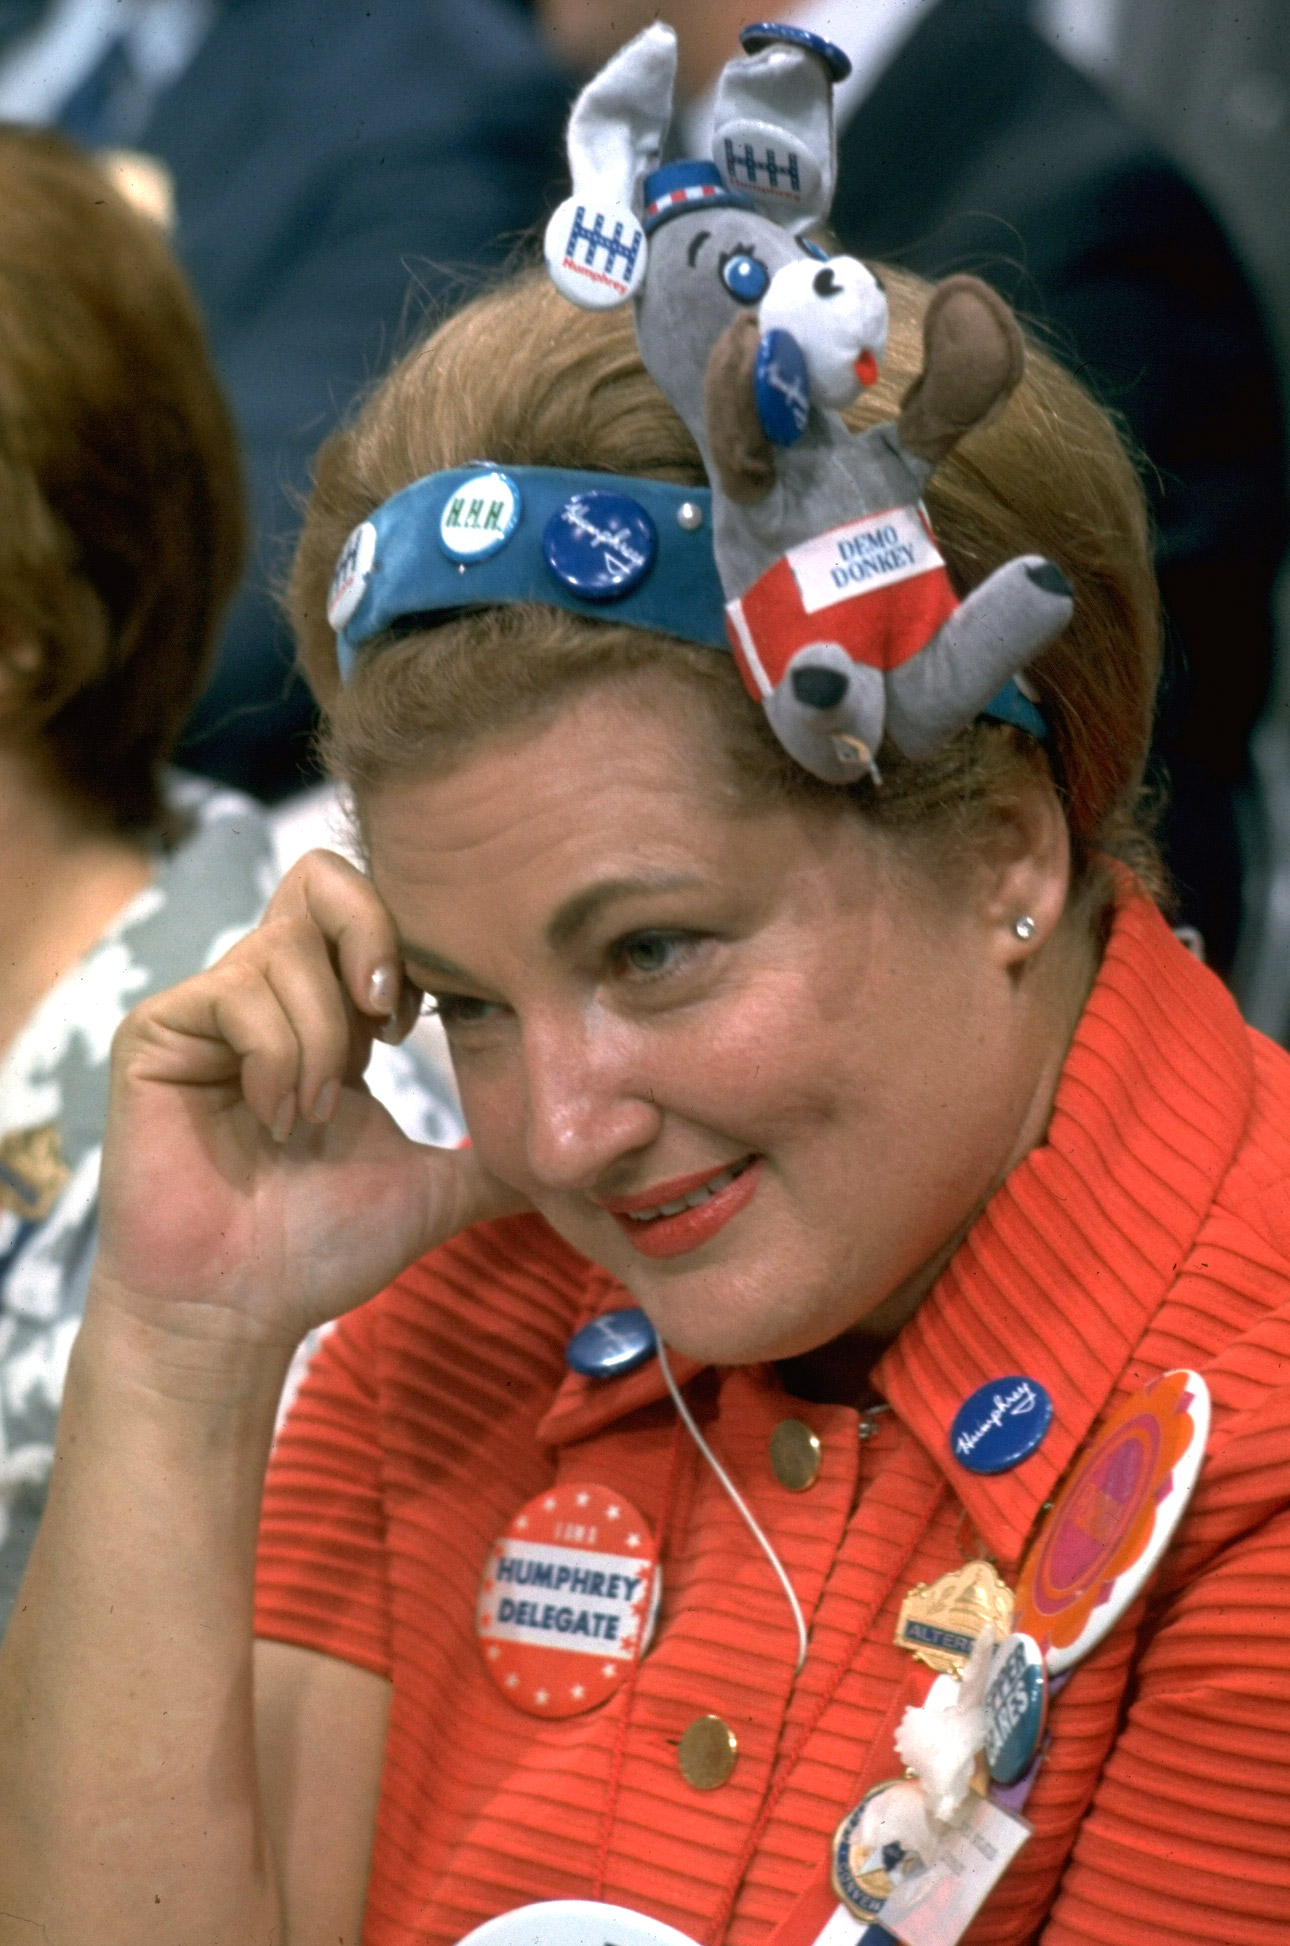 Colorful hat at the Democratic National Convention, 1968.